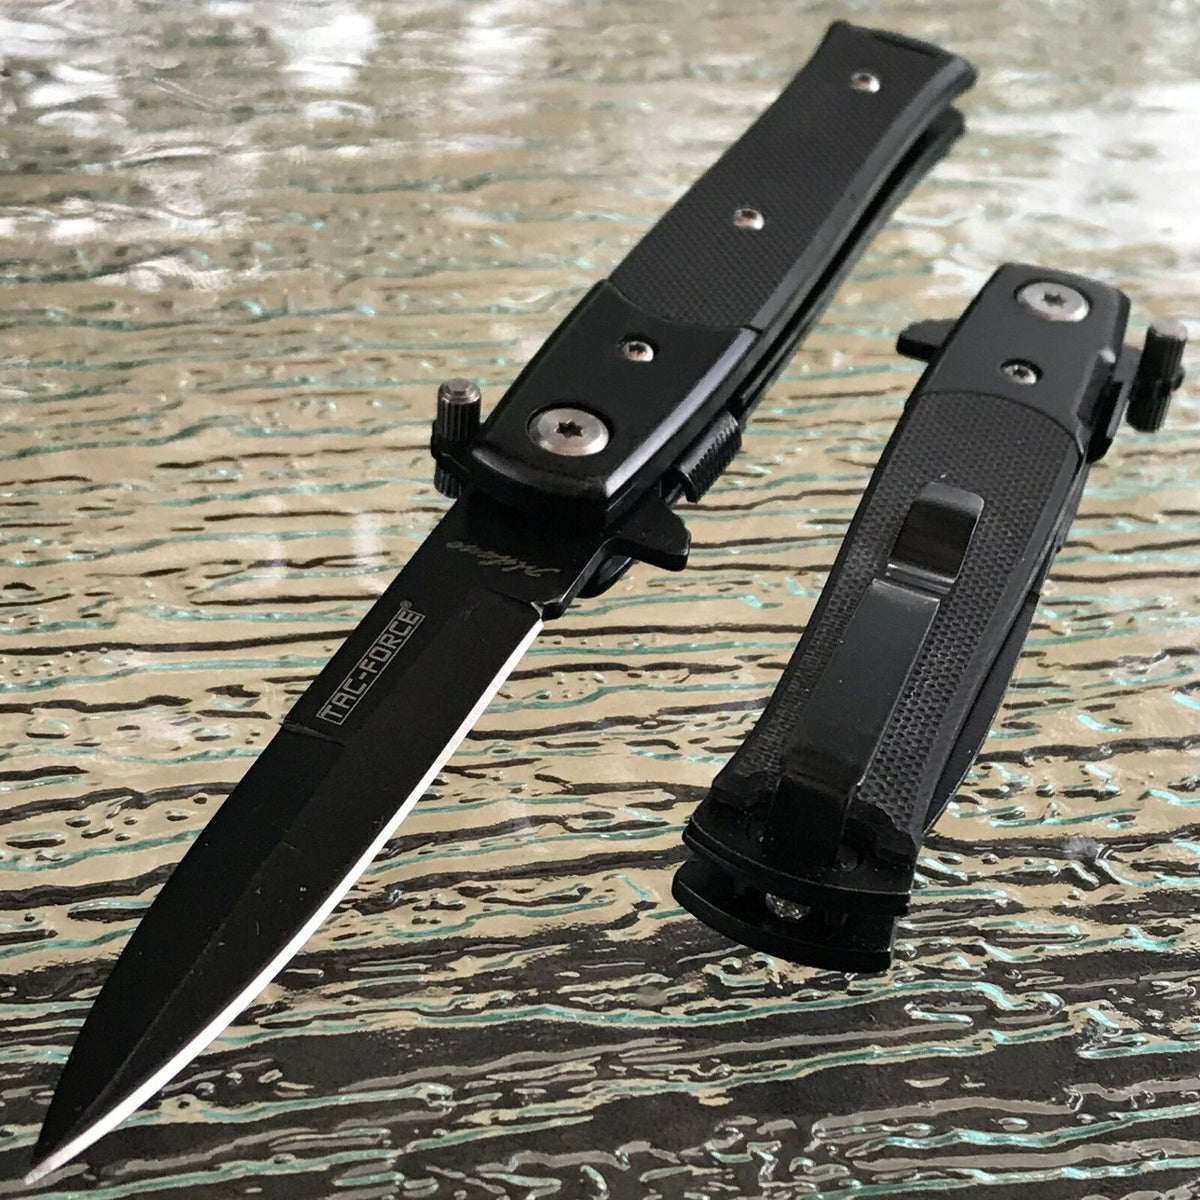 7 Tac Force Tactical Mini Milano Assisted Stiletto Pocket Knife